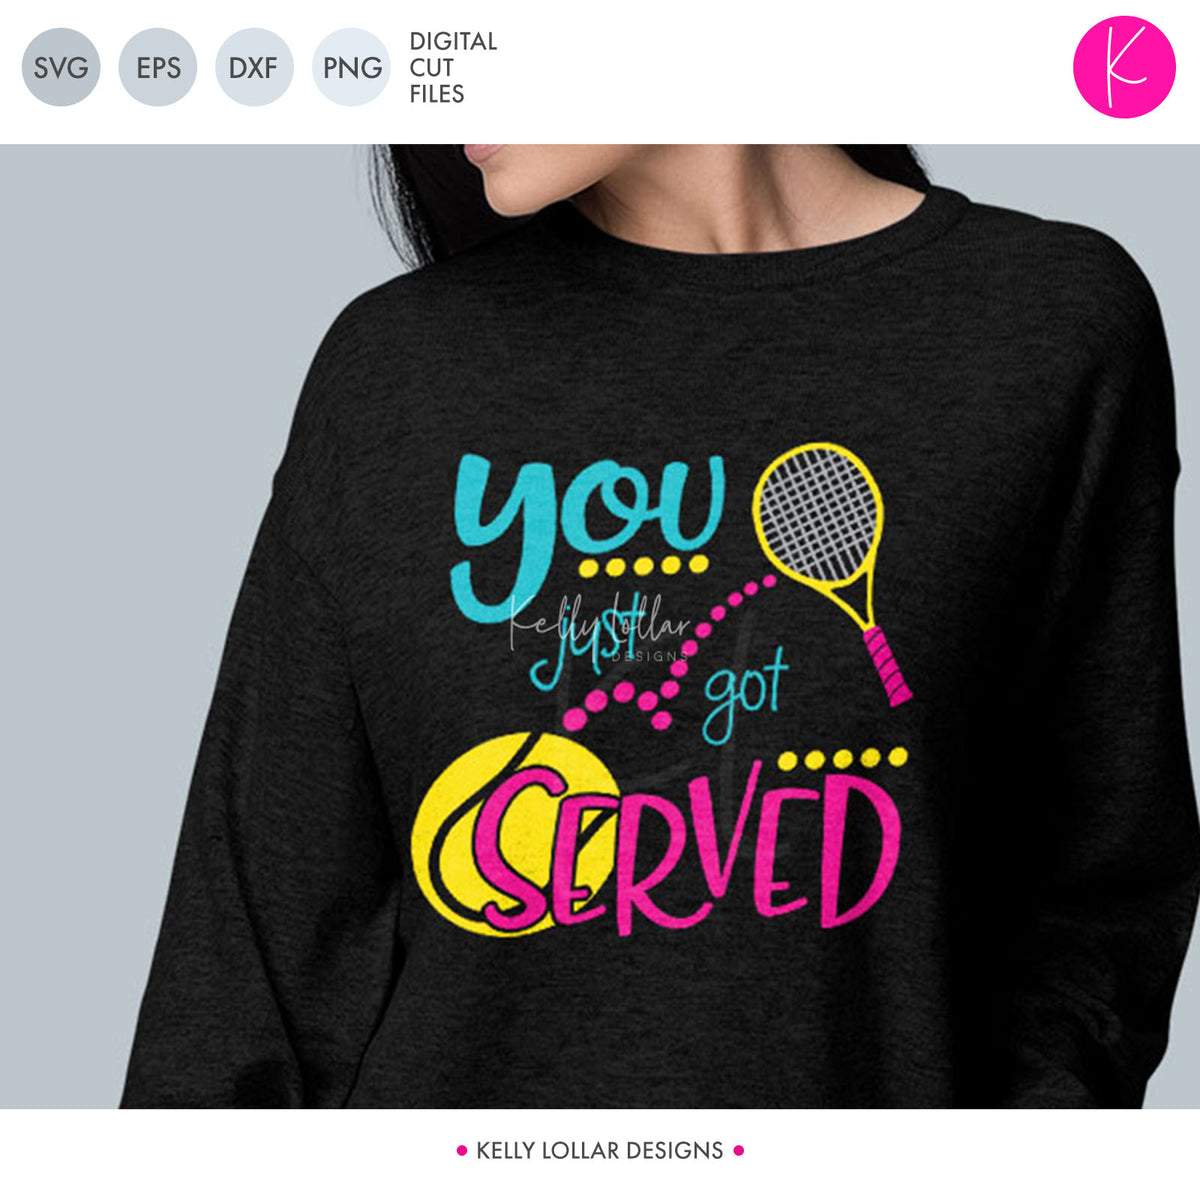 You Just Got Served | SVG DXF EPS PNG Cut Files